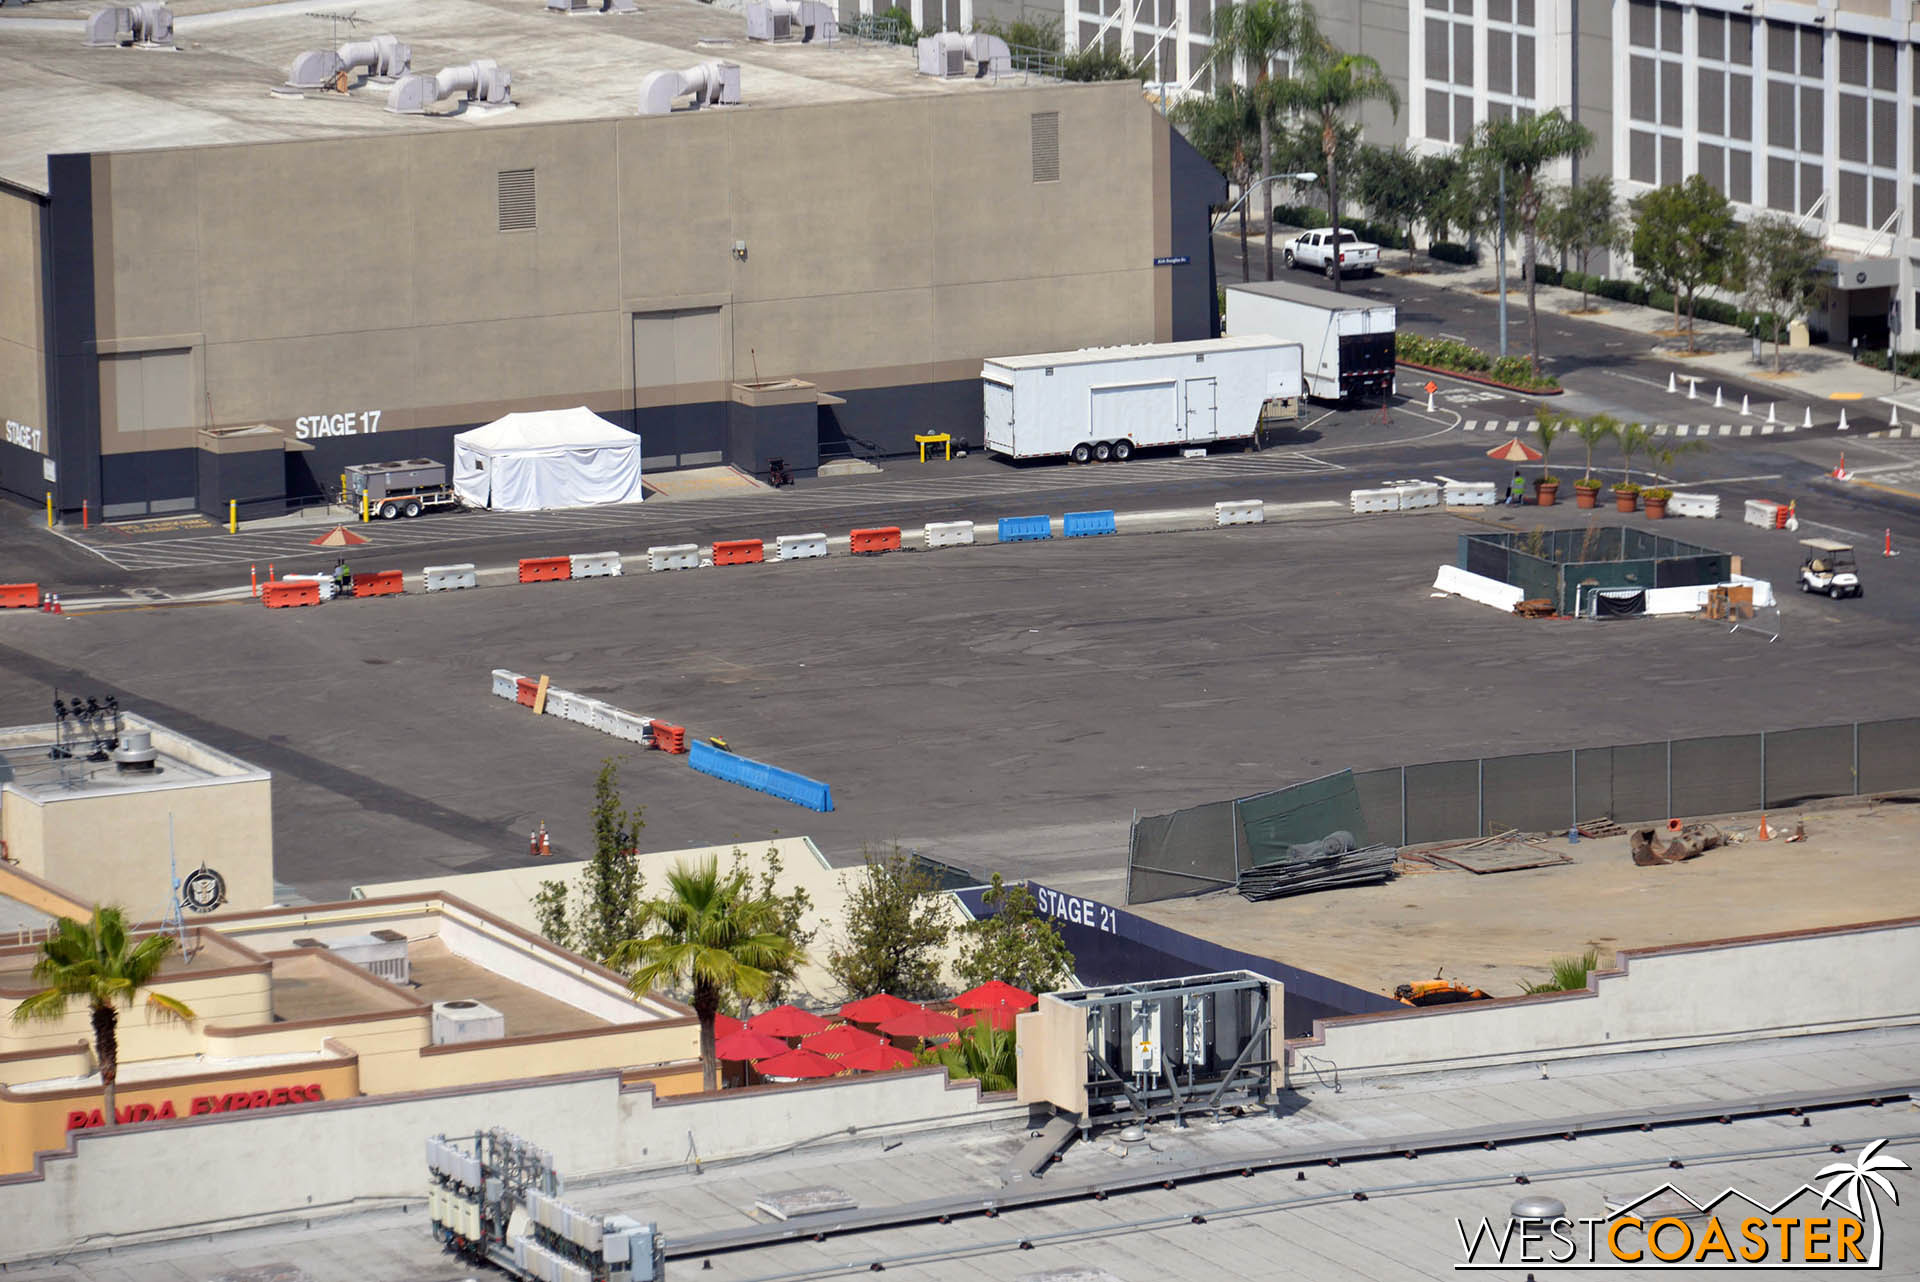  So in the meantime, it gets to be construction staging for Jurassic World. 